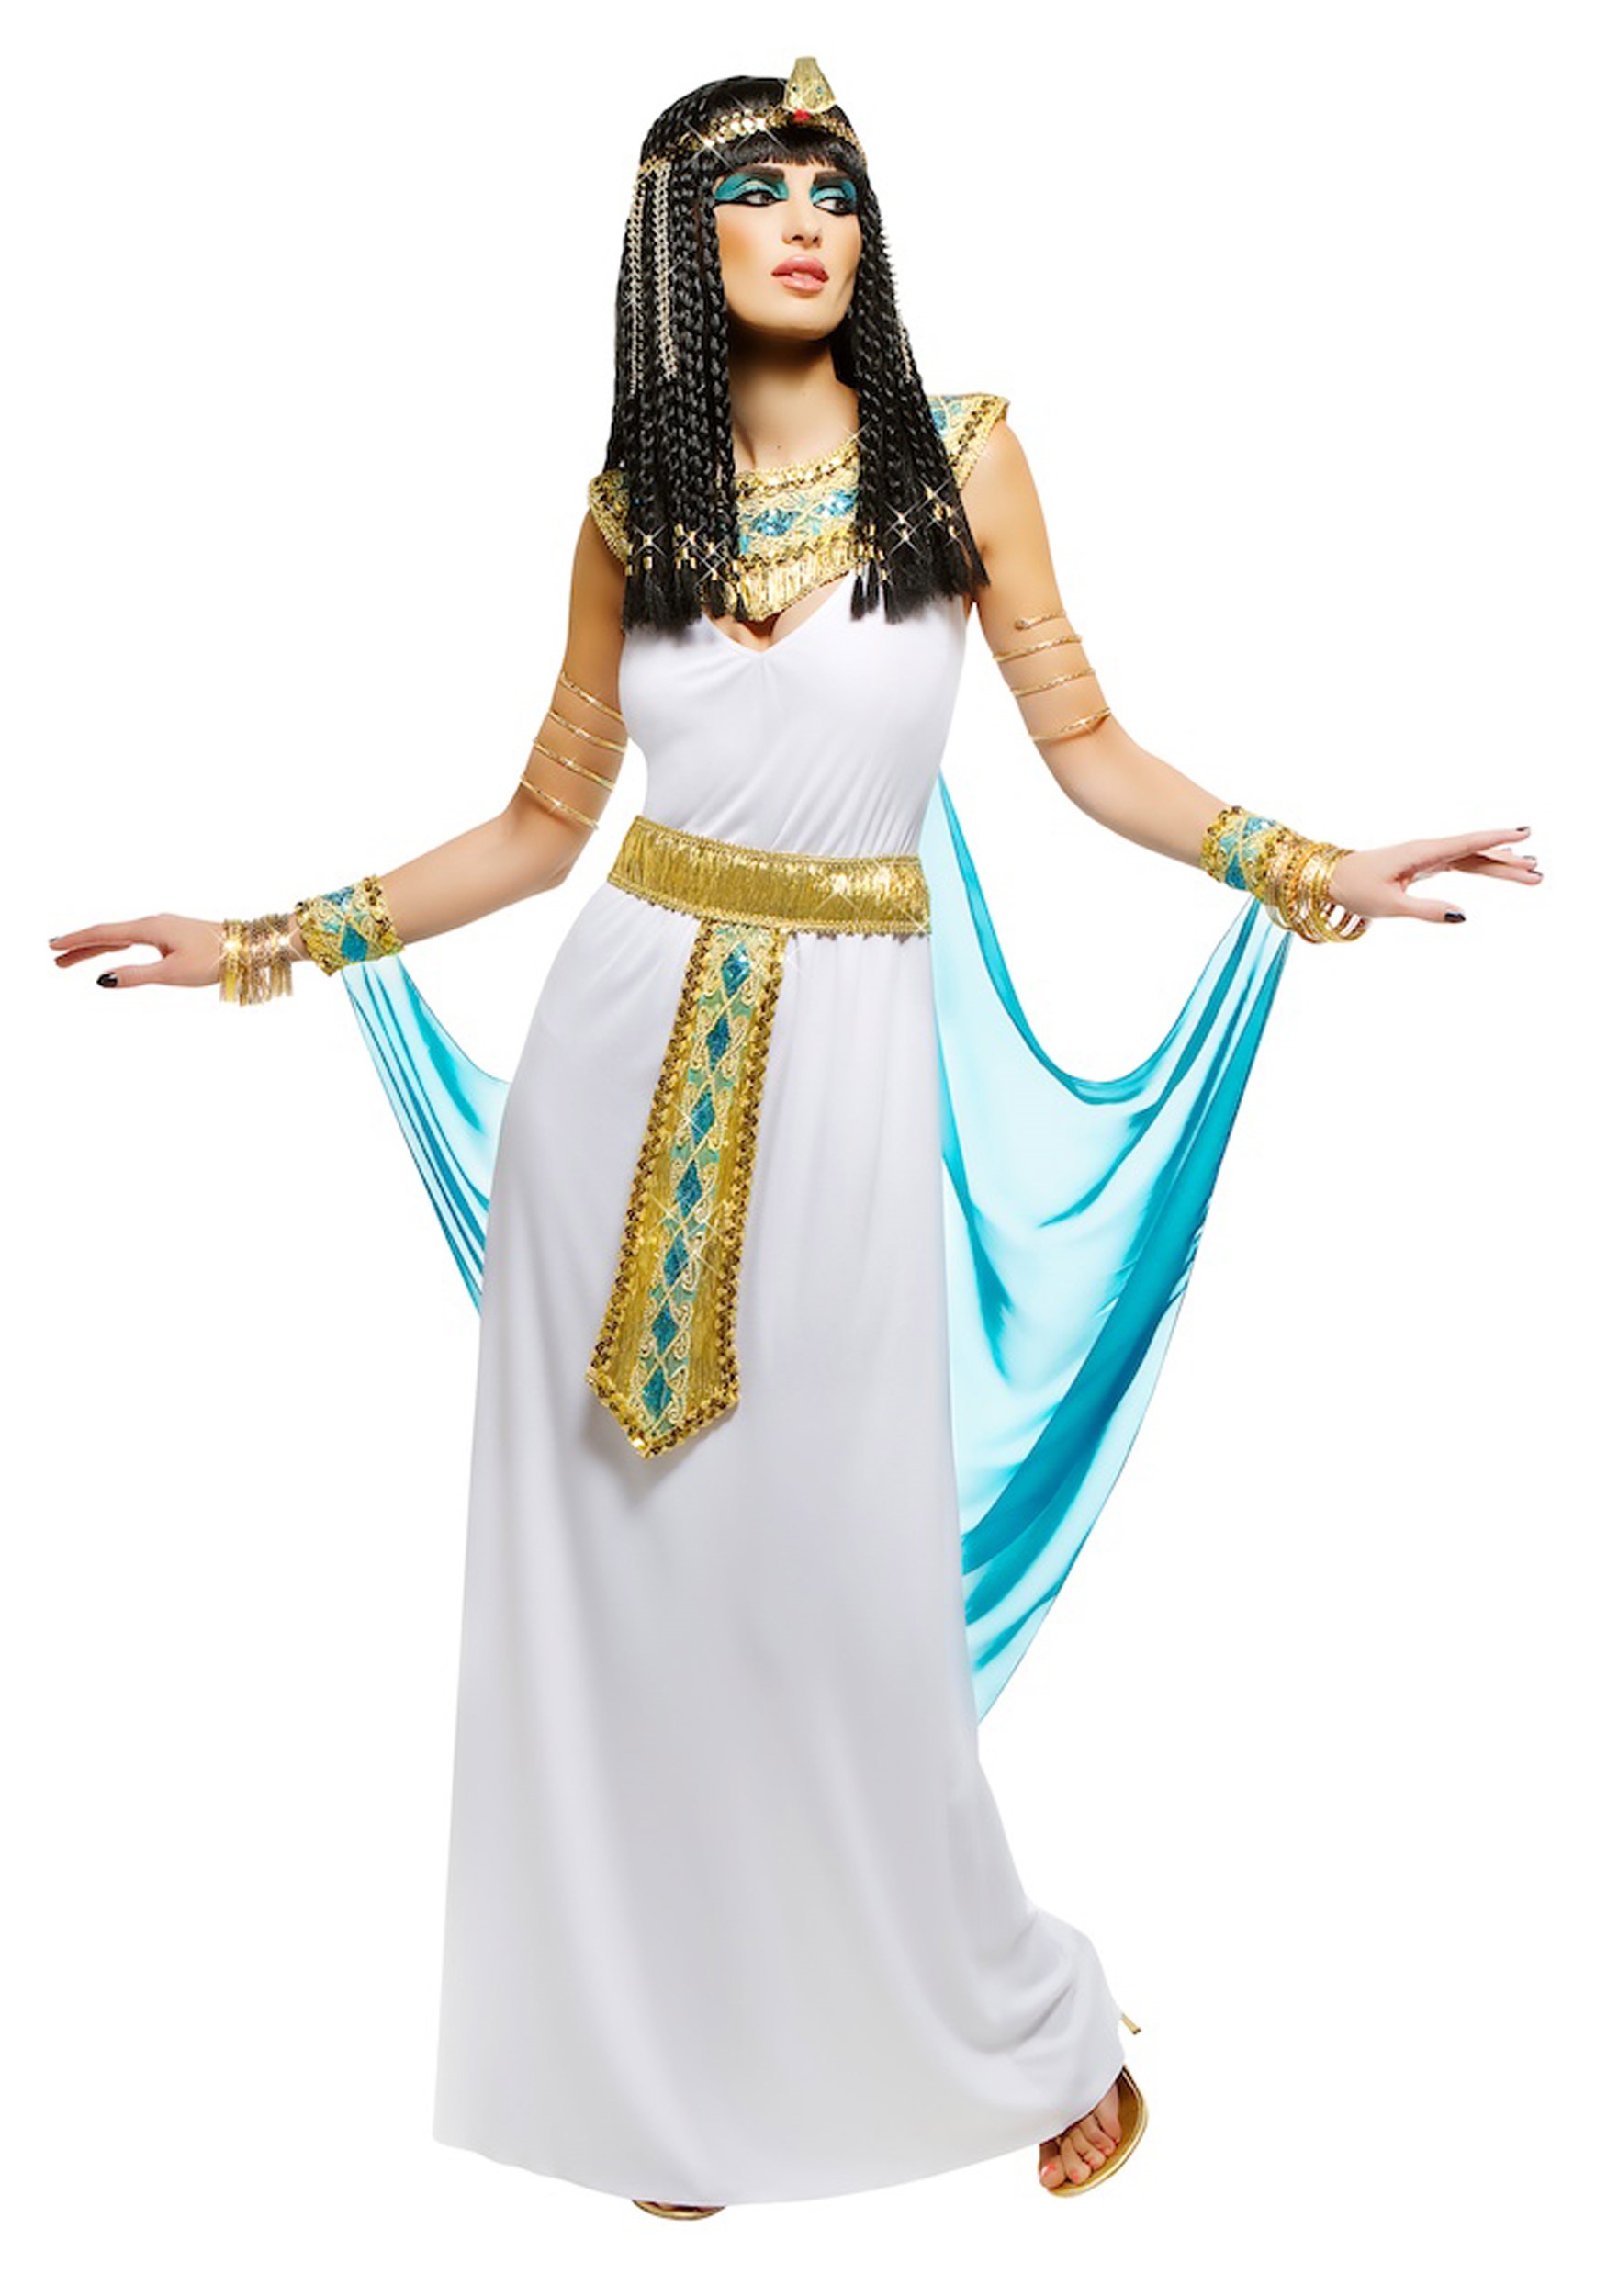 Queen Cleopatra Costume For Adults